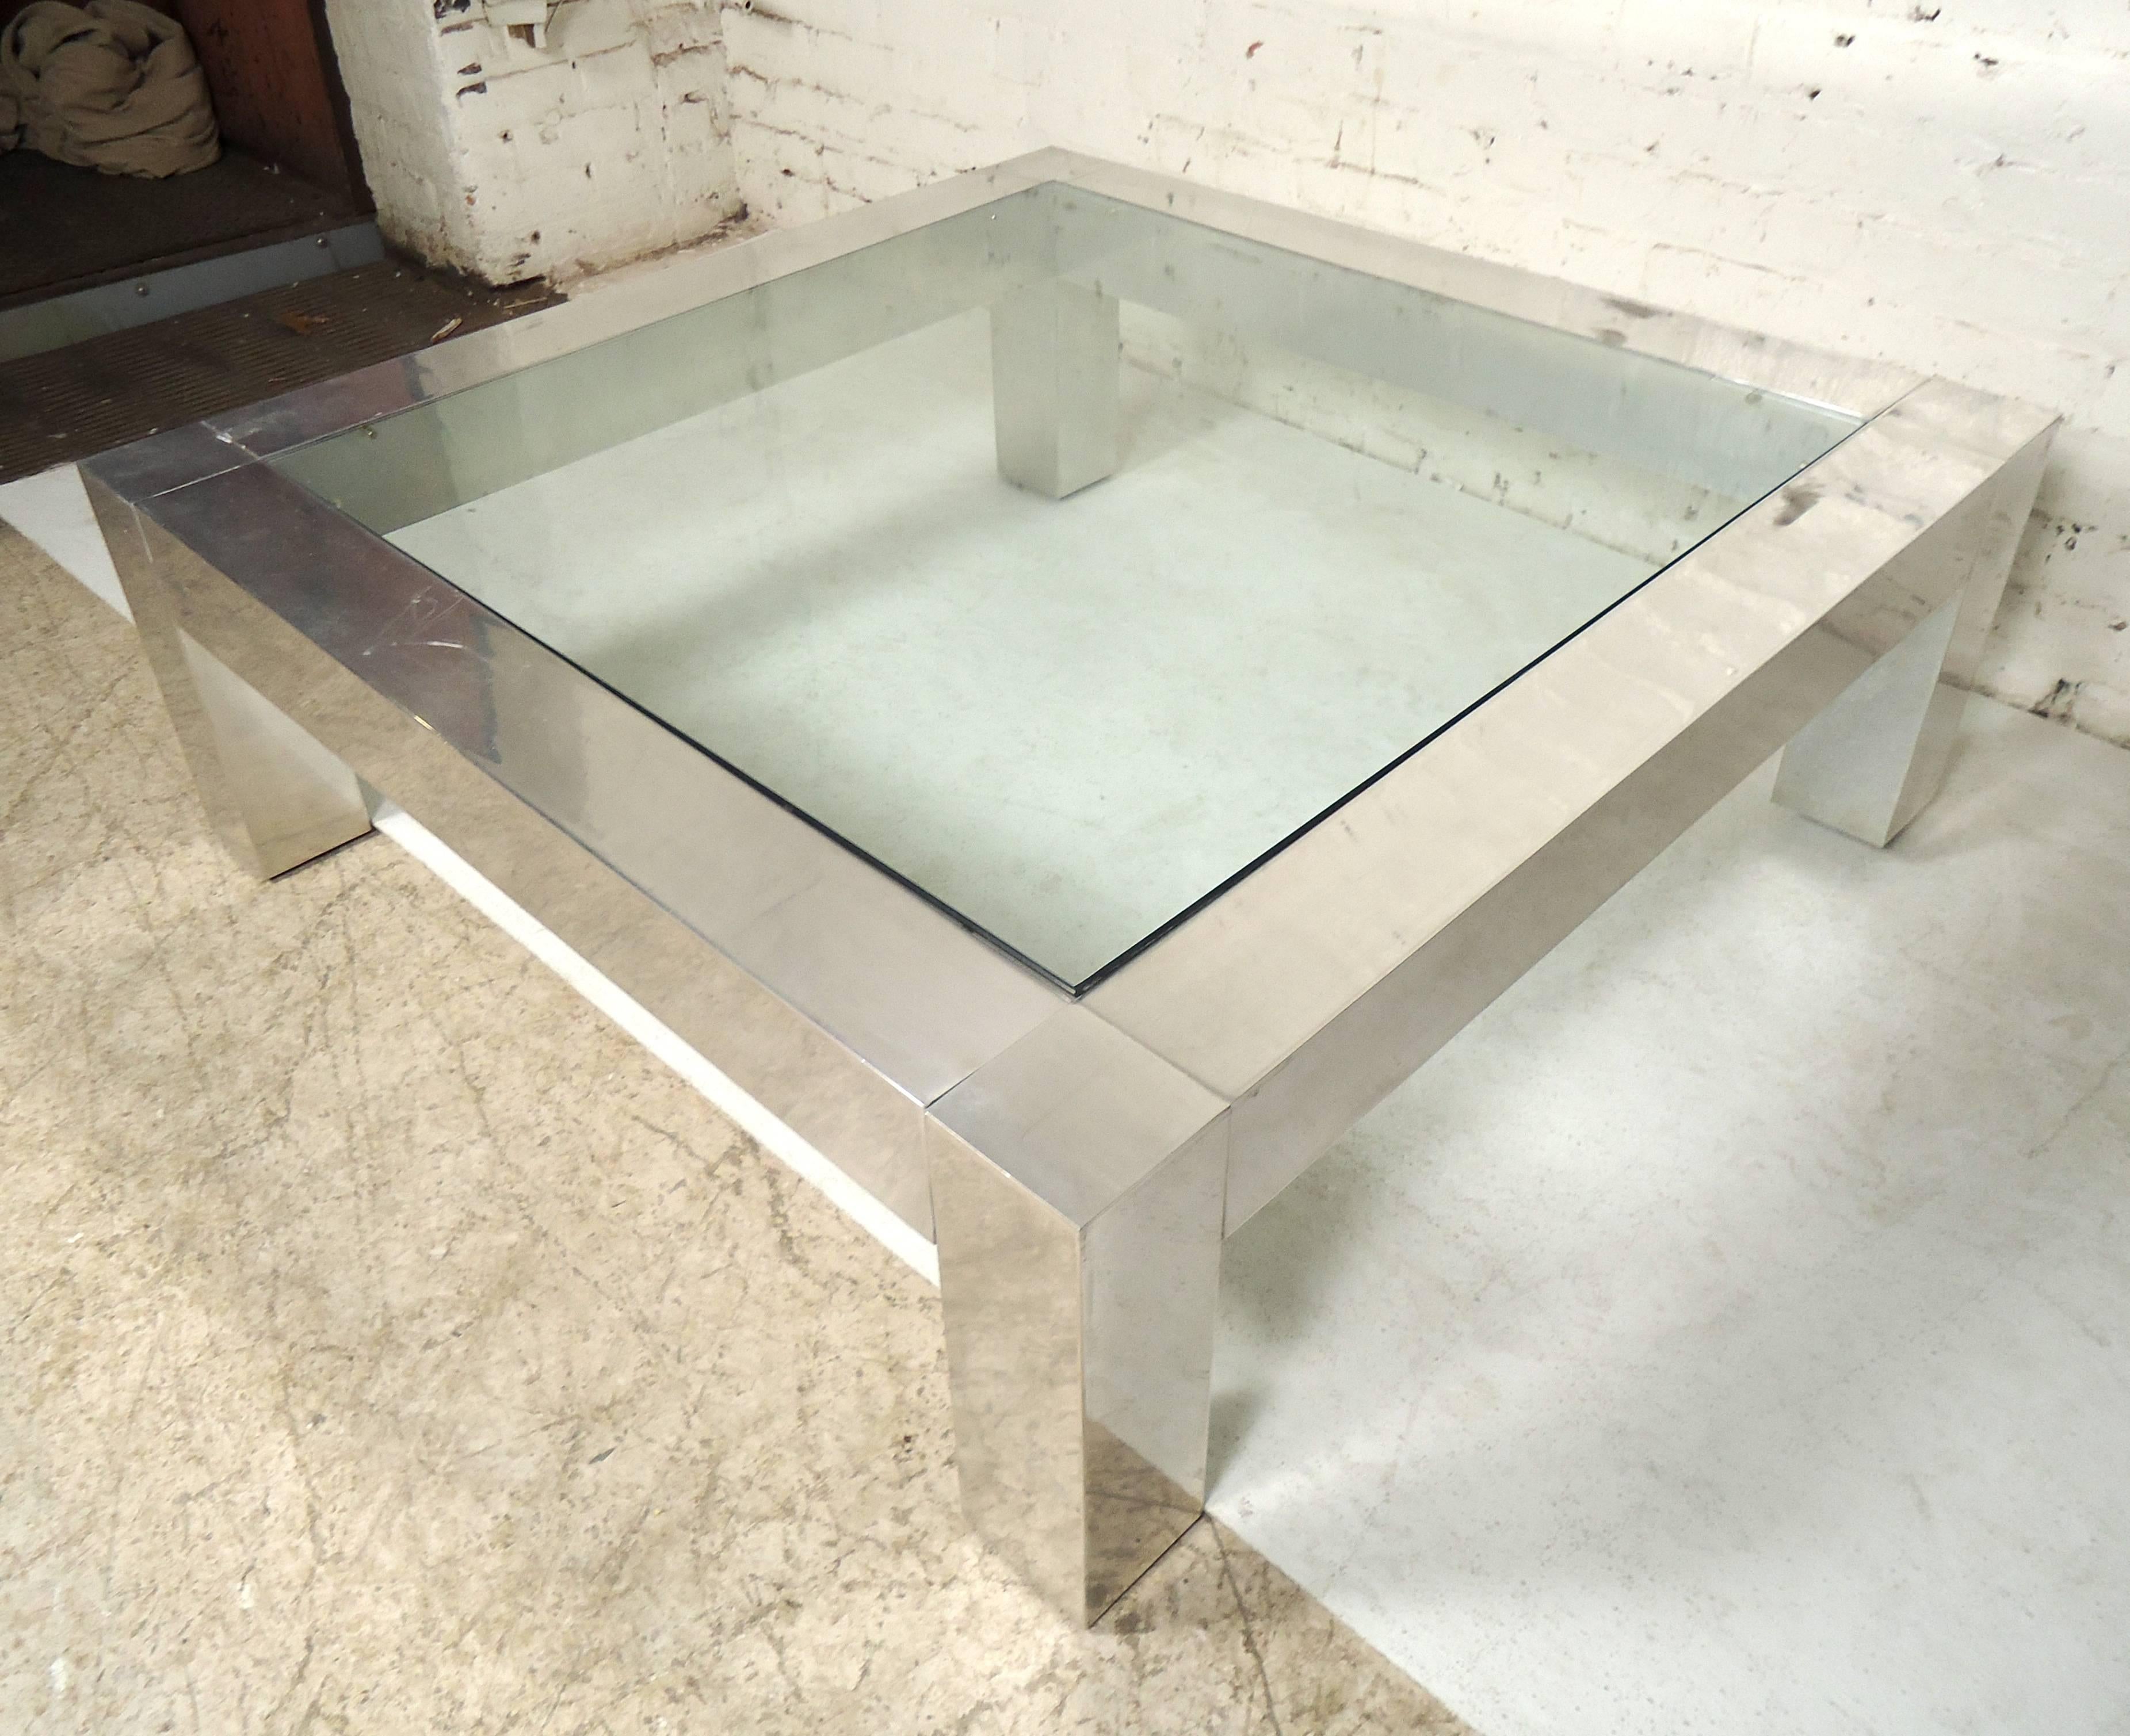 Large square chrome frame coffee table with glass. Great for a large living room or office area.

(Please confirm item location - NY or NJ - with dealer).